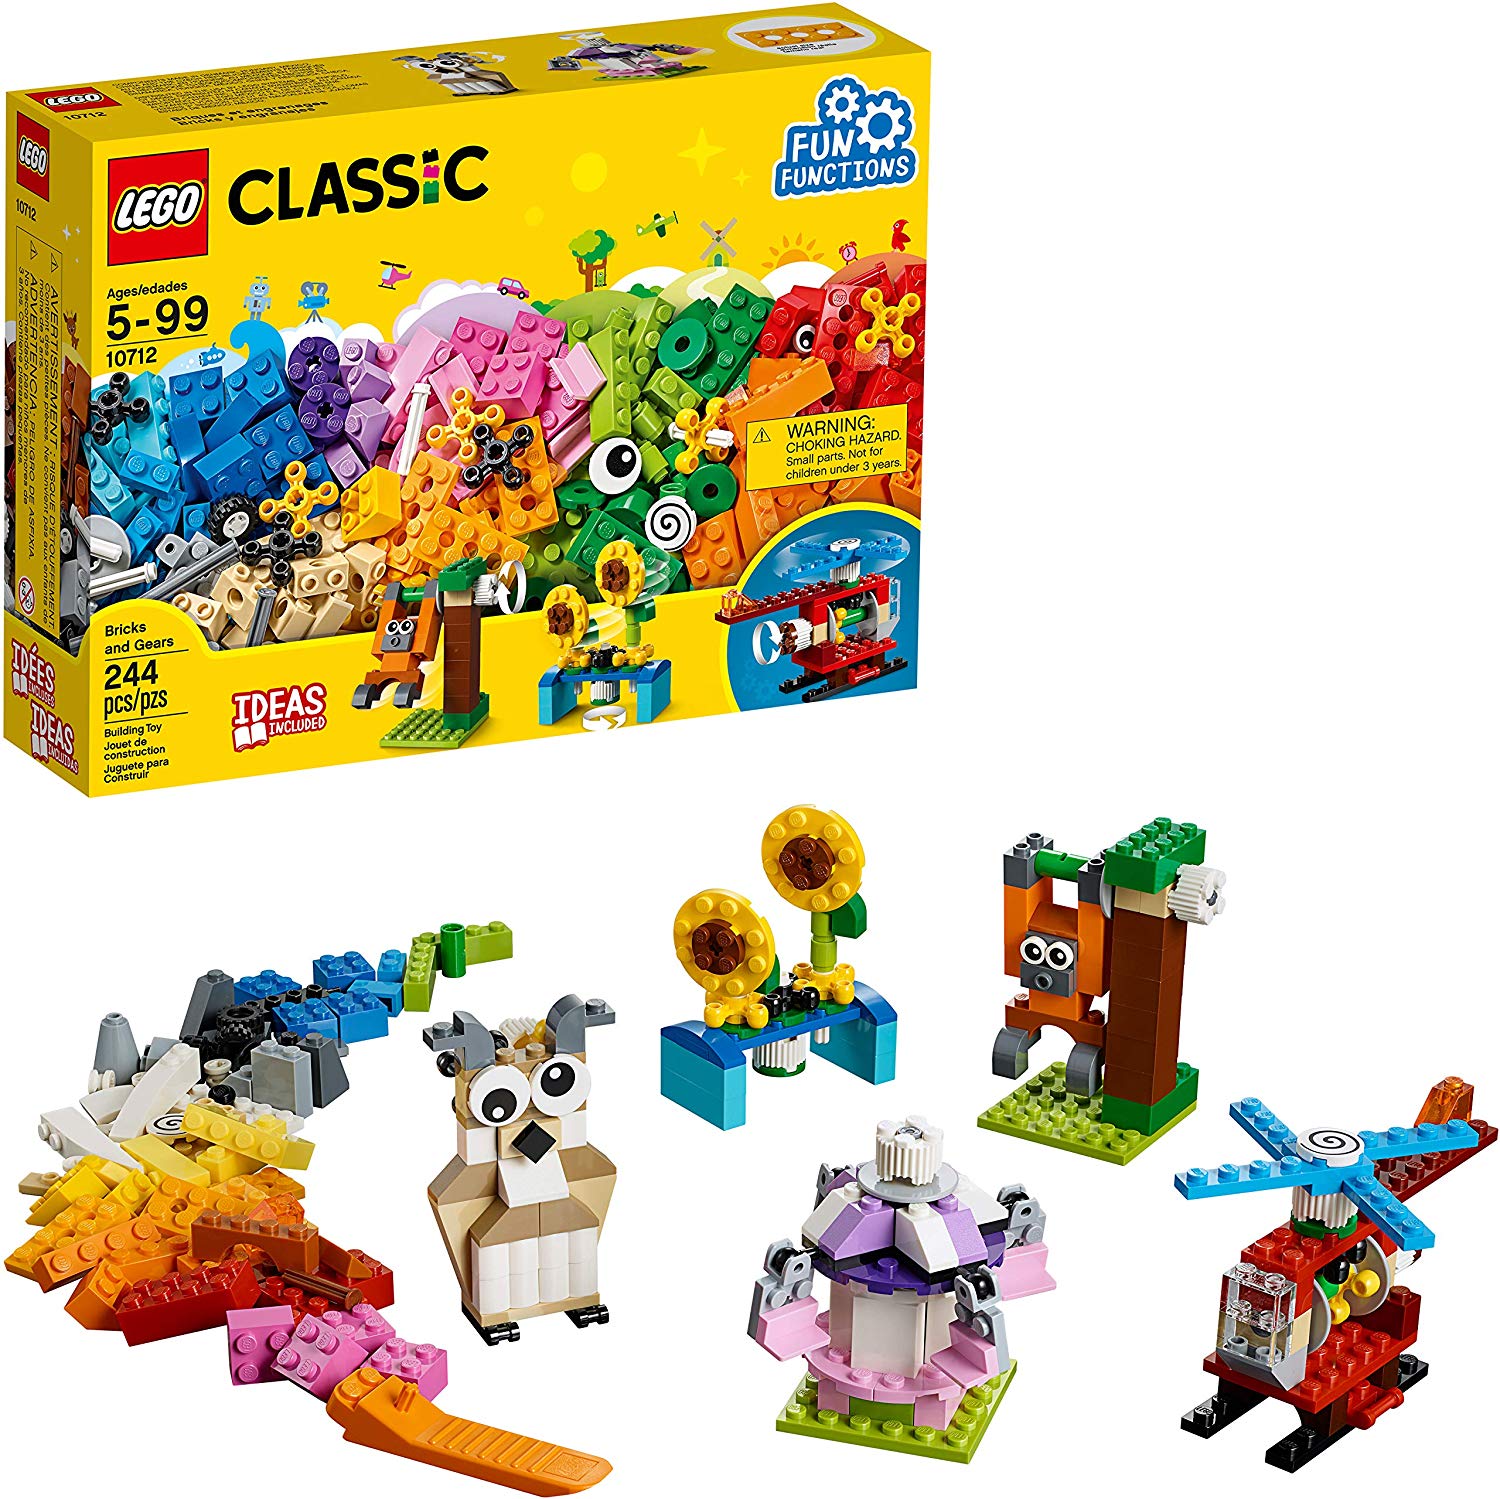 LEGO Classic Bricks and Gears 10712 Building Kit (244 Pieces) $11.99 (REG $19.99)